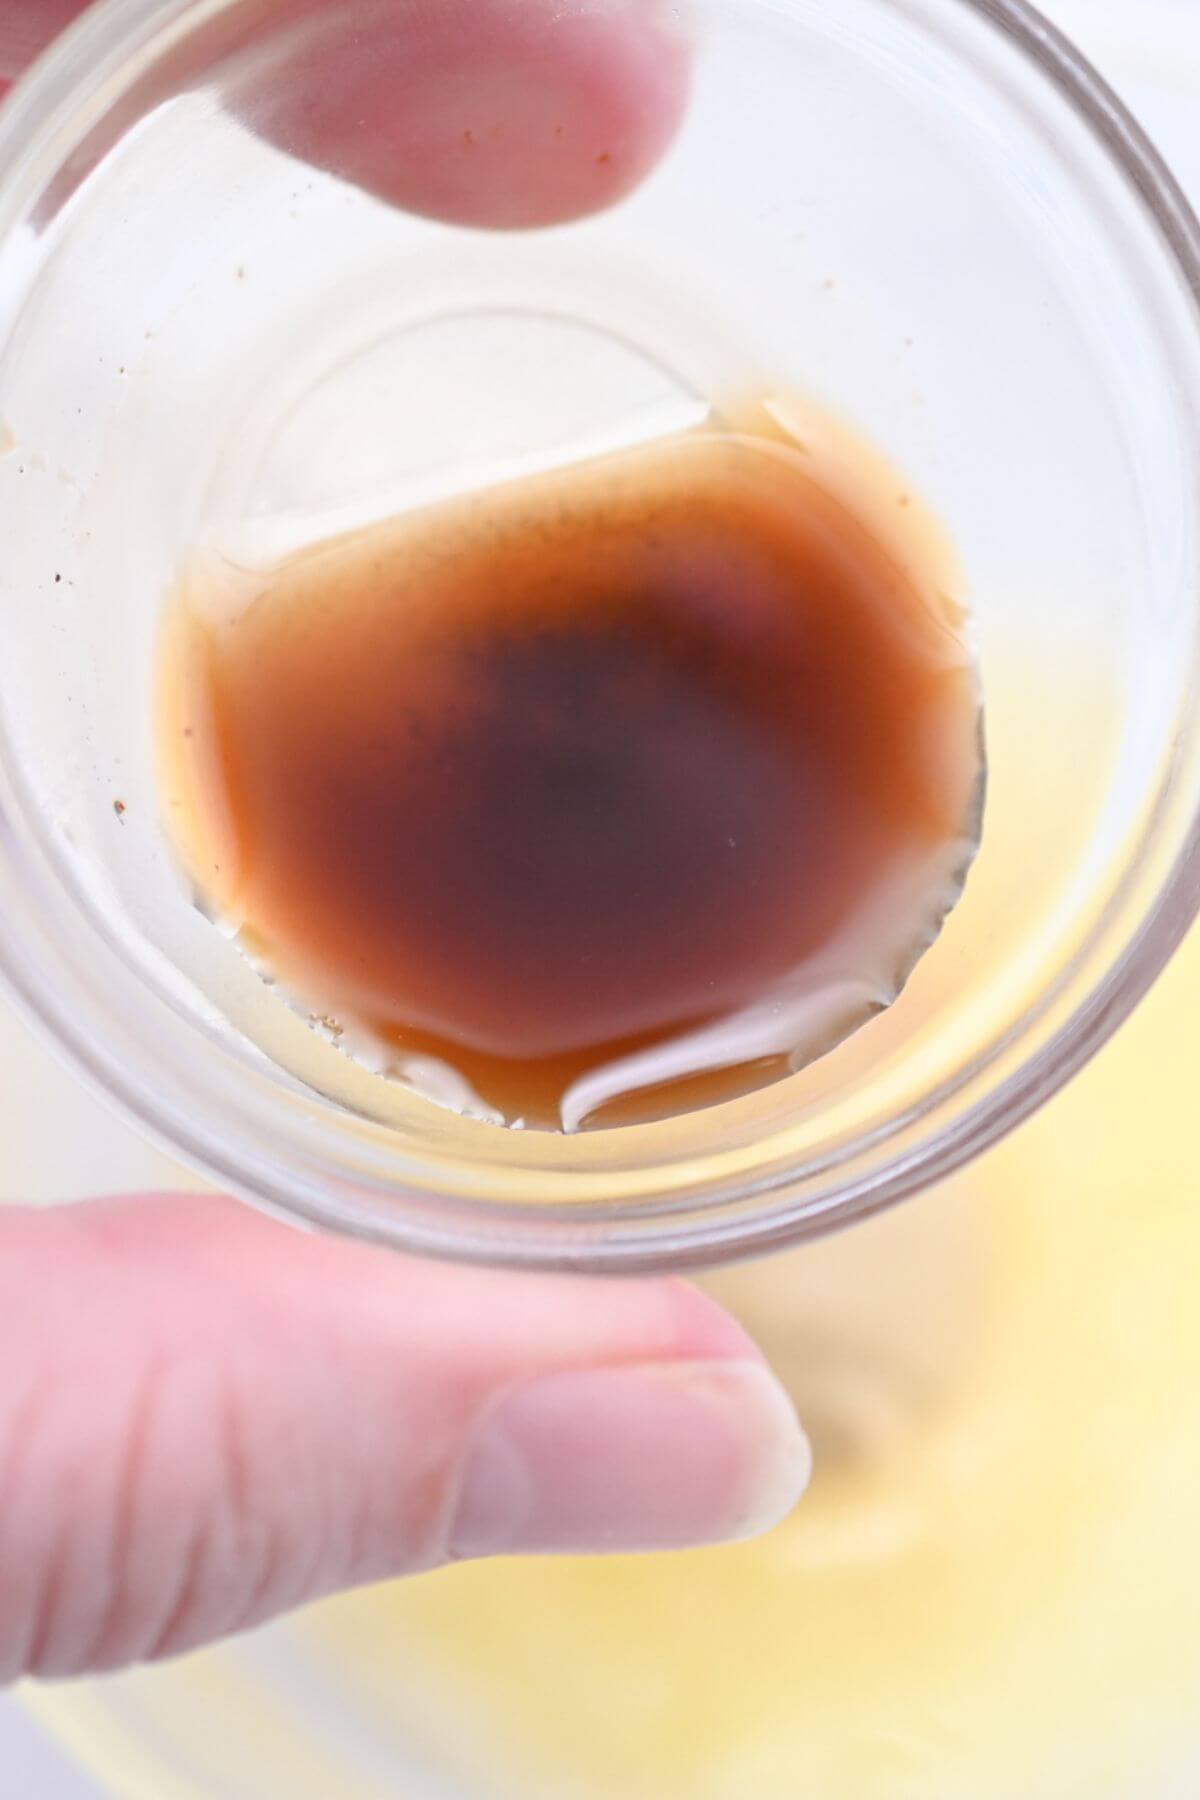 A person holding a glass with brown liquid in it.